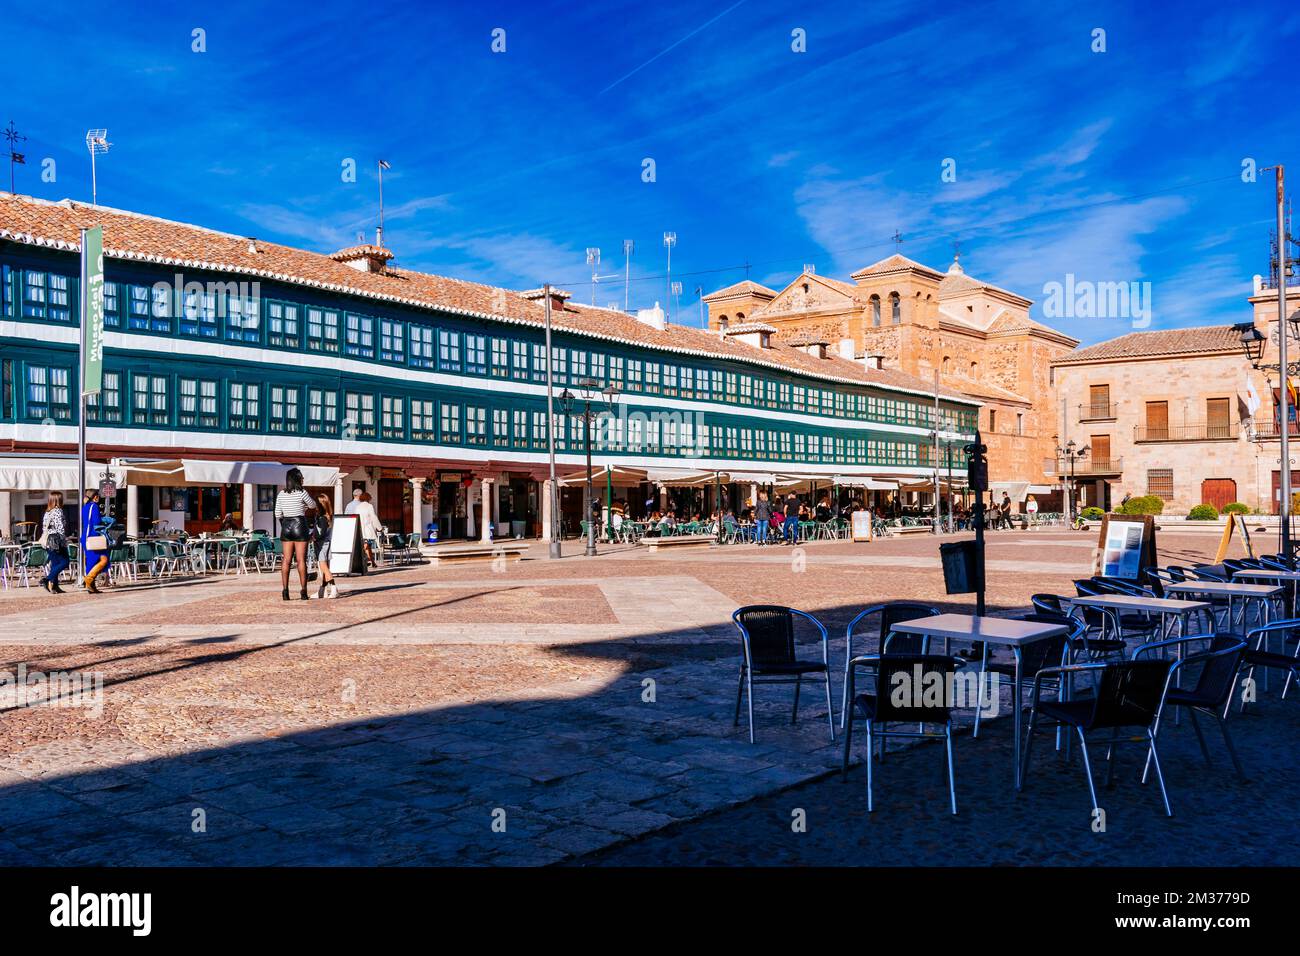 Plaza Mayor, Main Square,located in the center of the old town with a rectangular, irregular floor layout, with arcades of Tuscan stone columns under Stock Photo